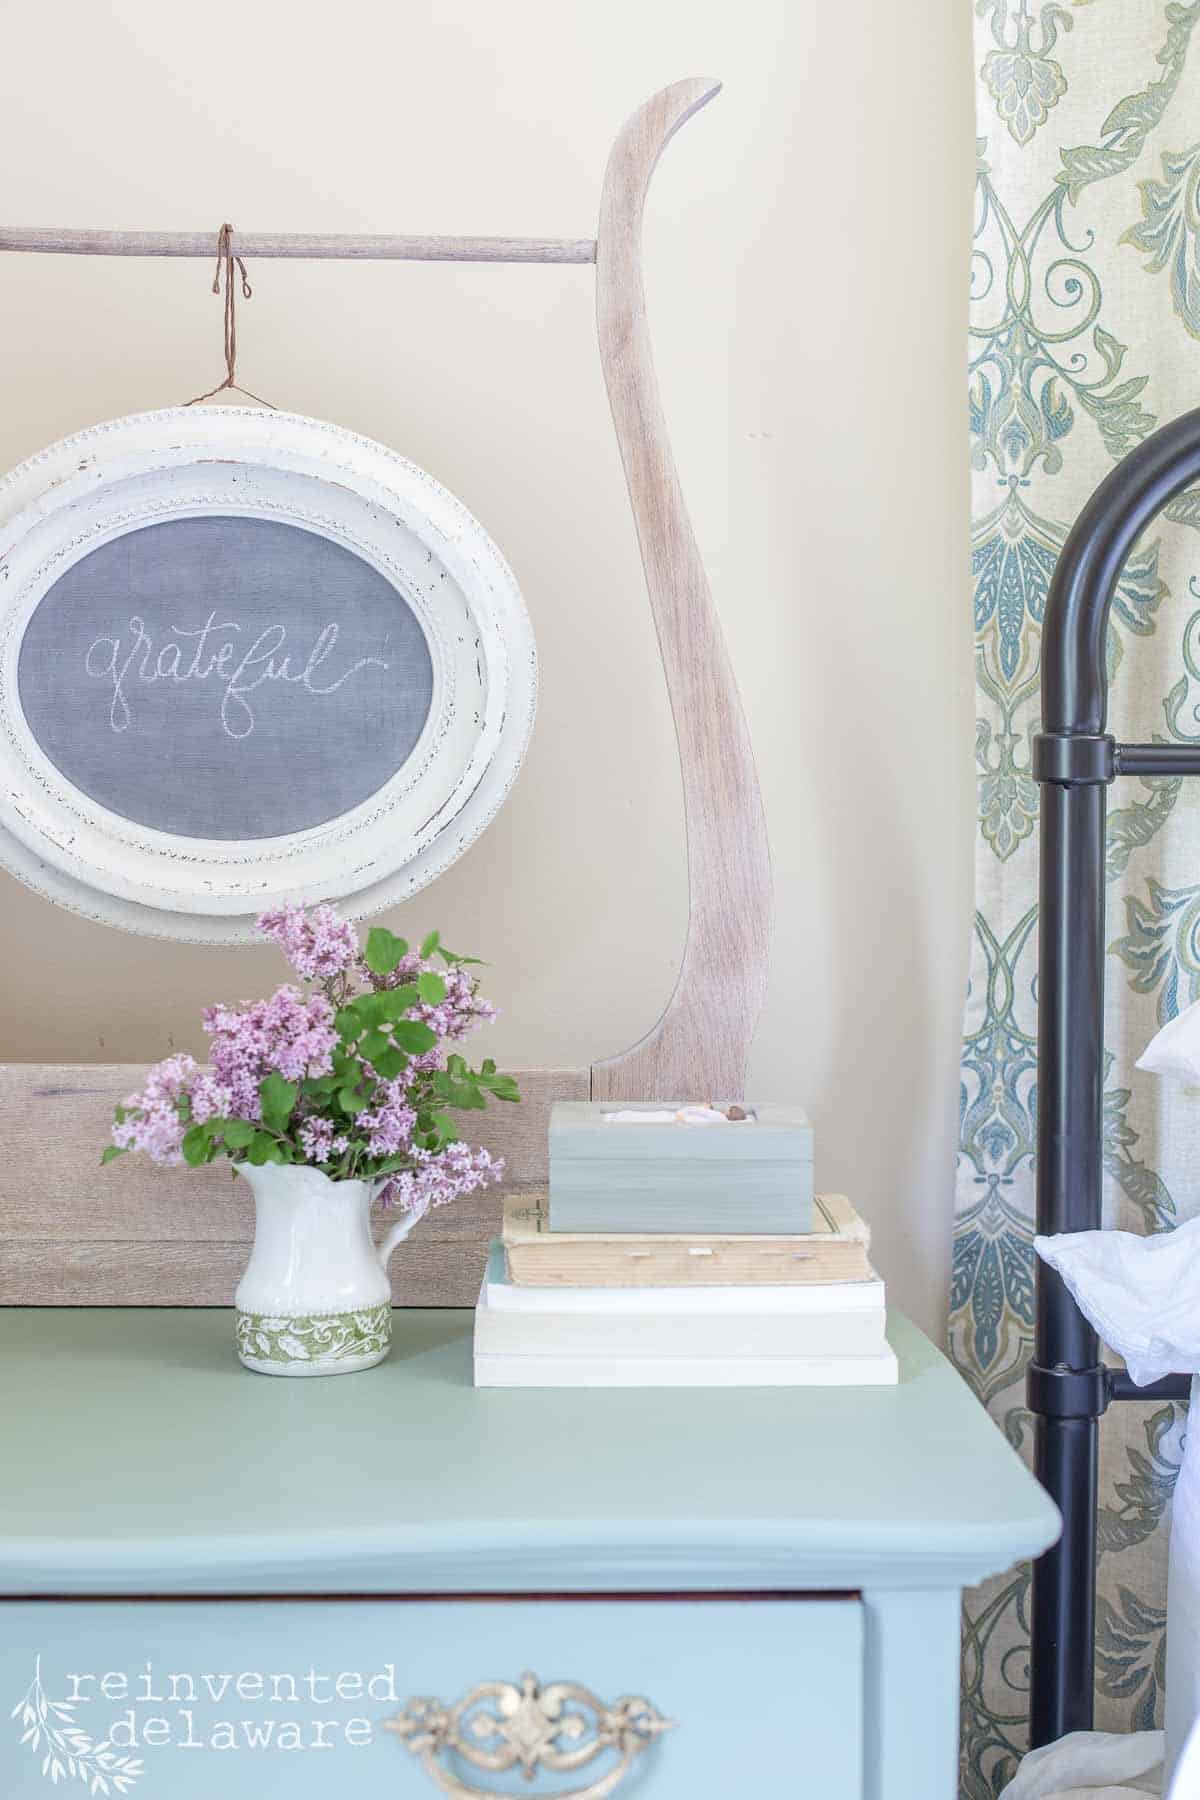 lilac blooms in an ironstone pitcher on top of an antqiue washstand